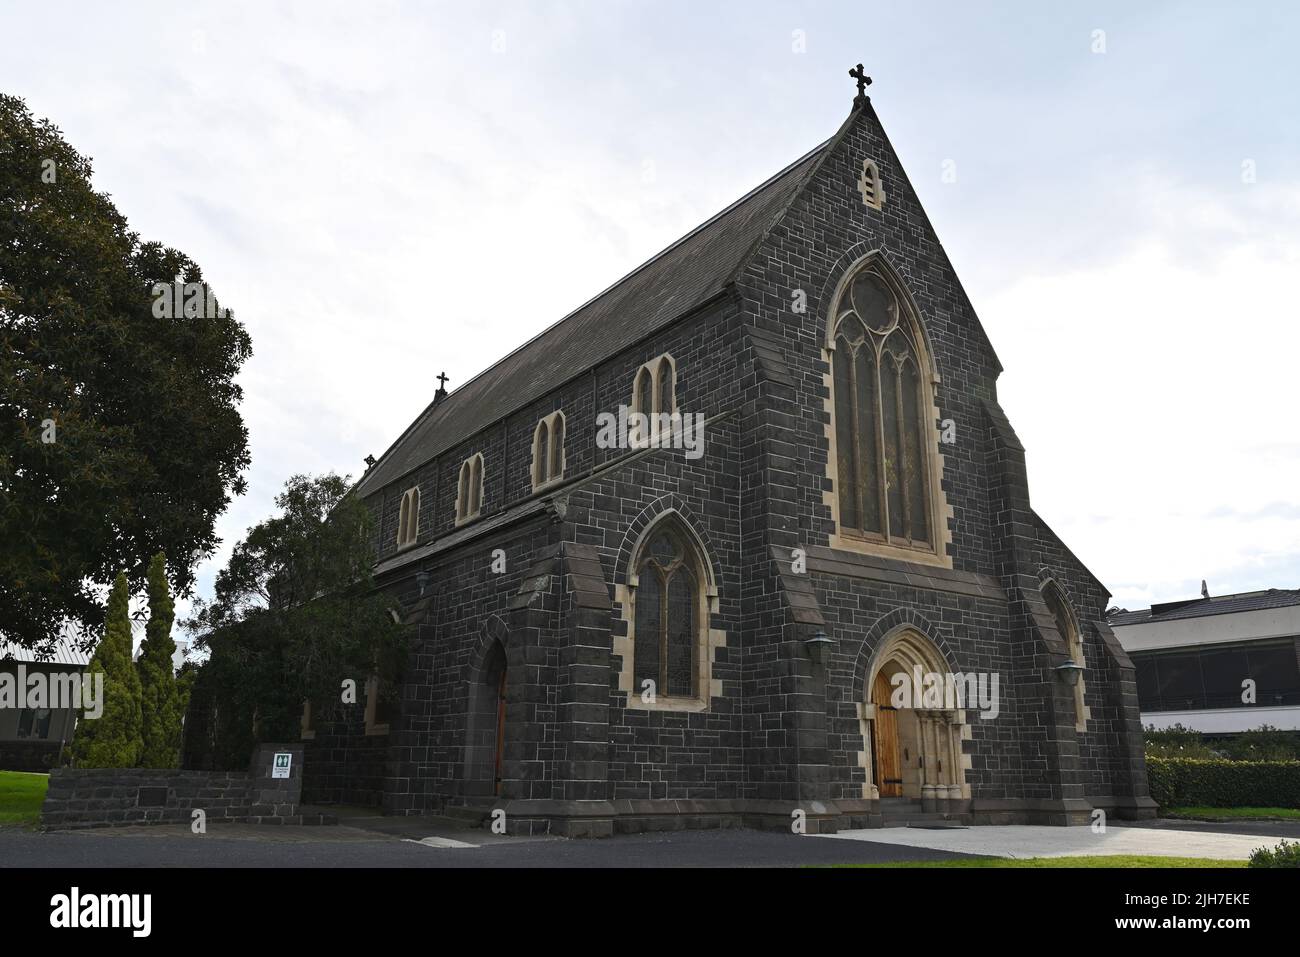 Exterior of Holy Trinity Anglican Church, predominantly made of bluestone, during an overcast day Stock Photo